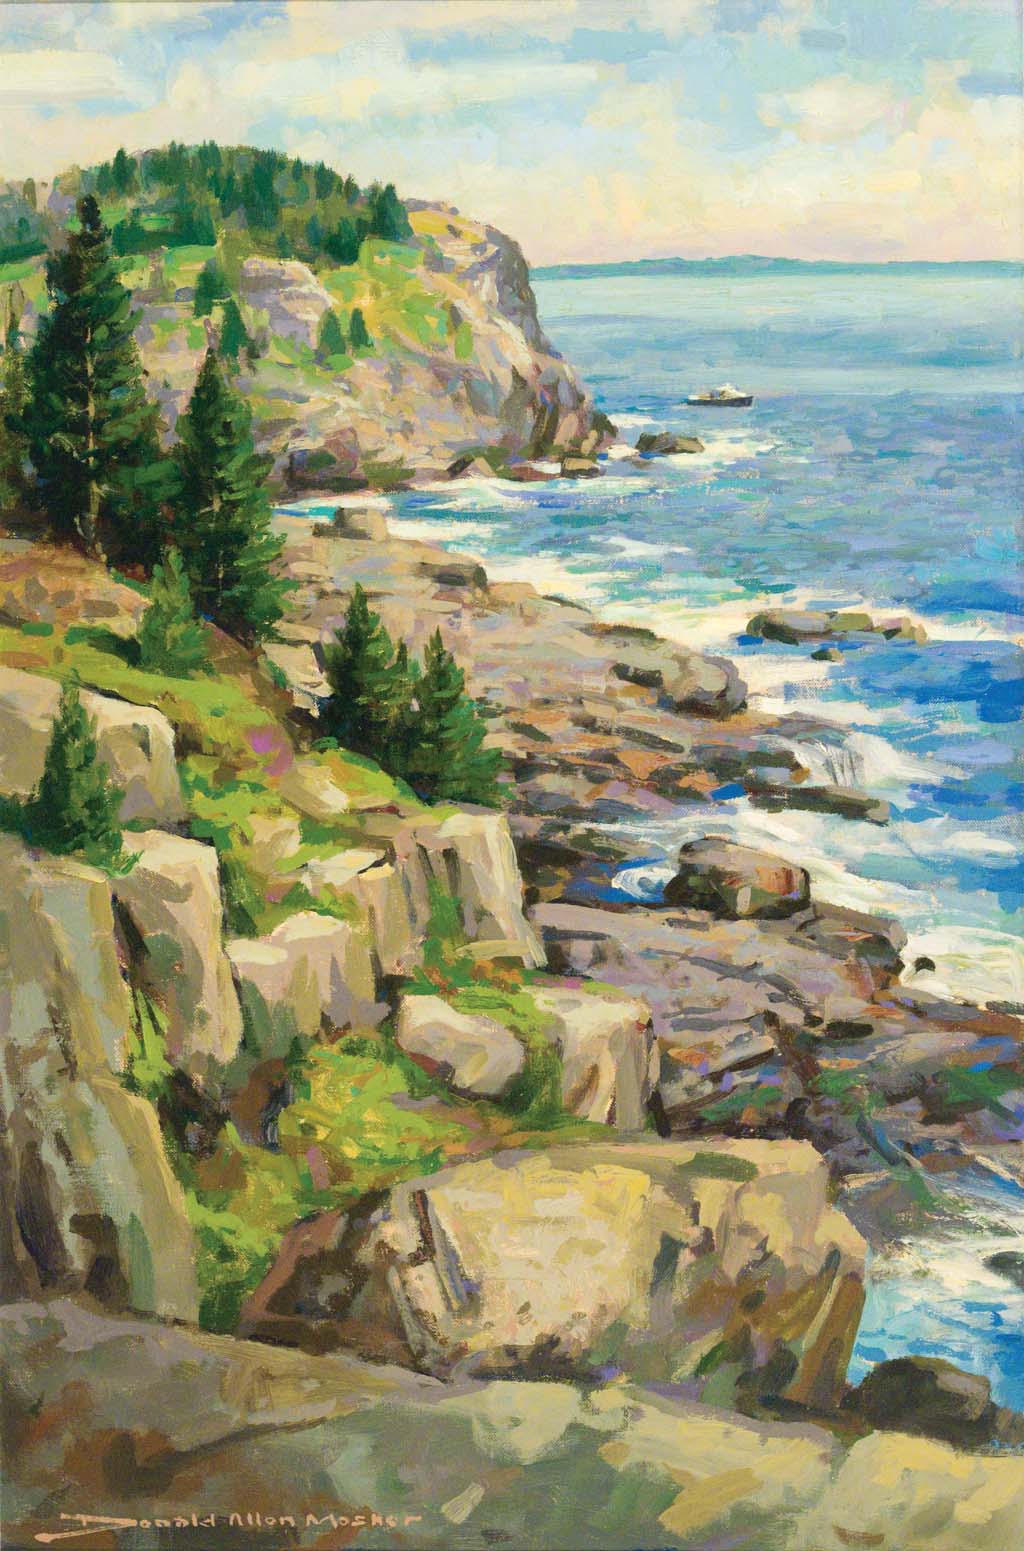 Mosher, Donald Allen, Monhegan Headlands. Oil on canvas, 30 x 20 in. Private Collection.